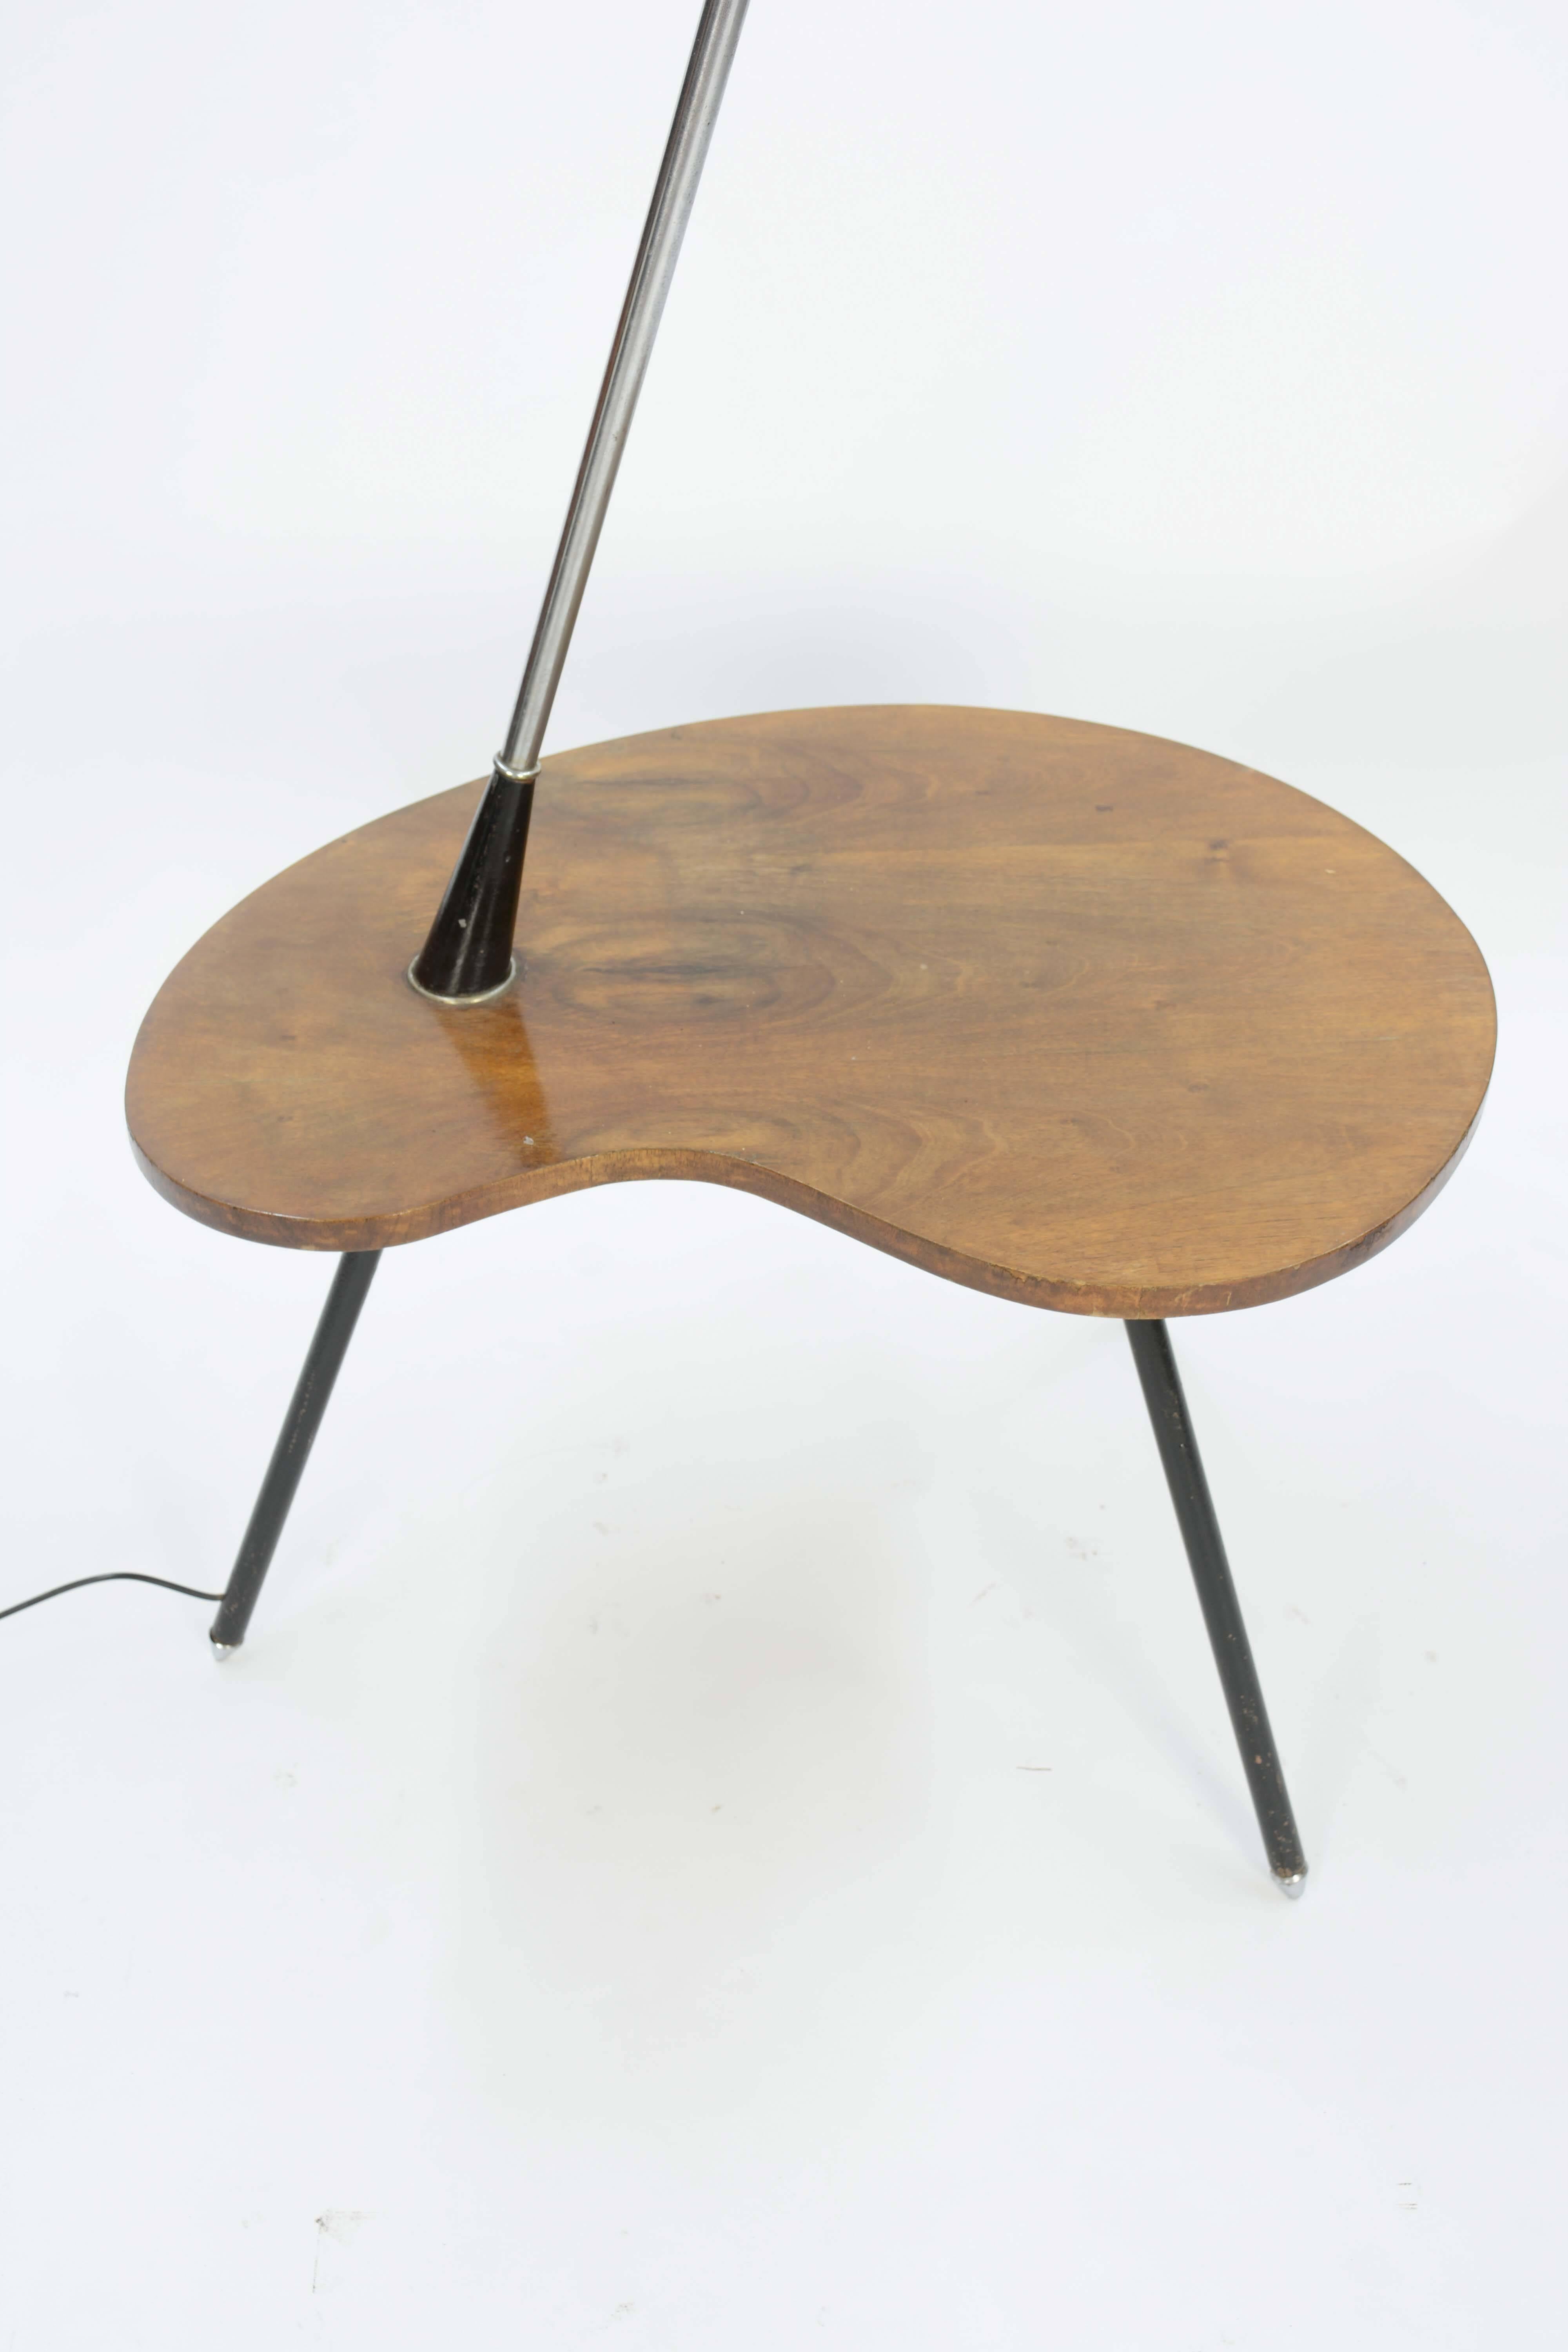 An atomic lamp table from Denmark with walnut table. An imported Danish floor lamp with a walnut biomorphic table top and a through angled leg to an amber globe. The tabletop is shaped like a painter's palette, 6